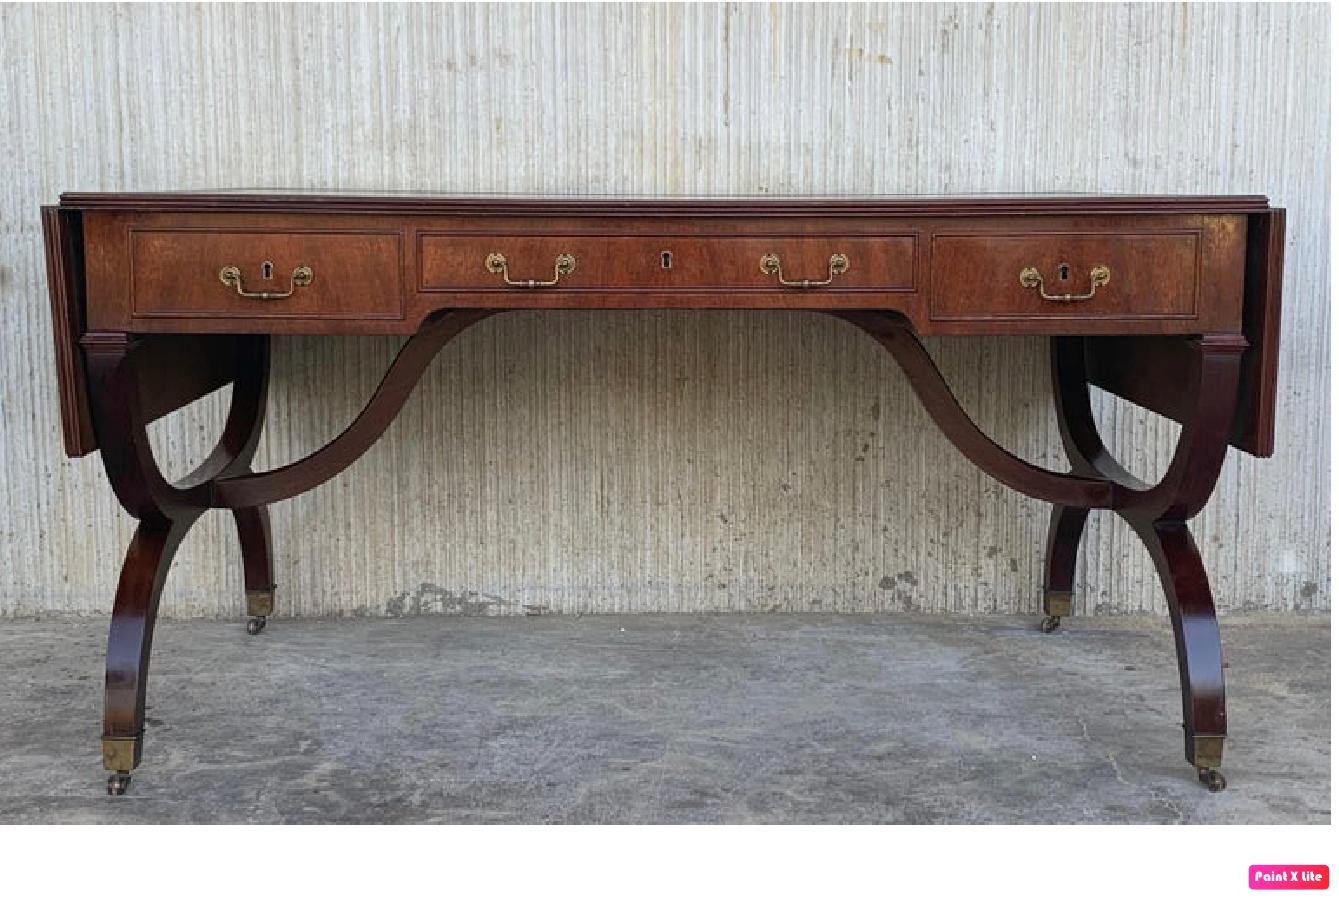 Empire Revival Stunning Victorian Library Writing Table or Desk Brown Leather Top Gillows Legs